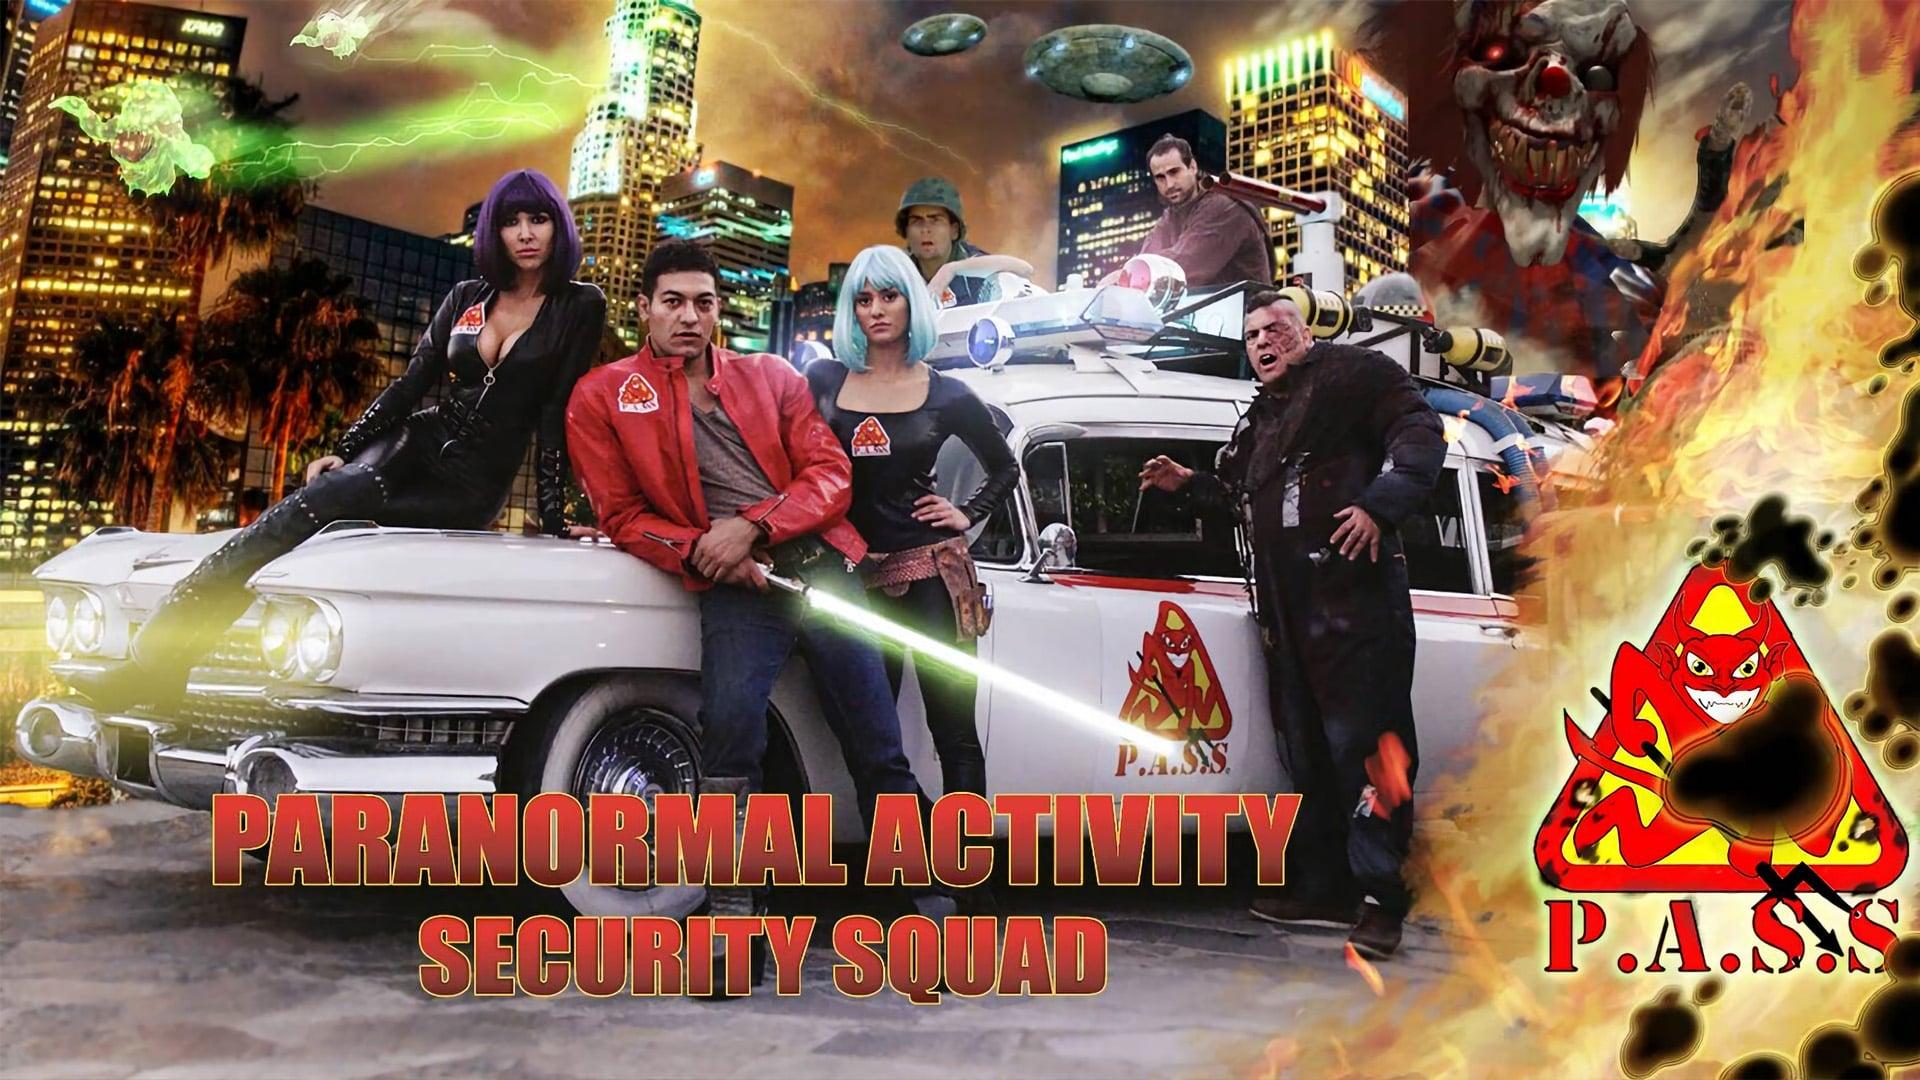 Paranormal Activity Security Squad backdrop